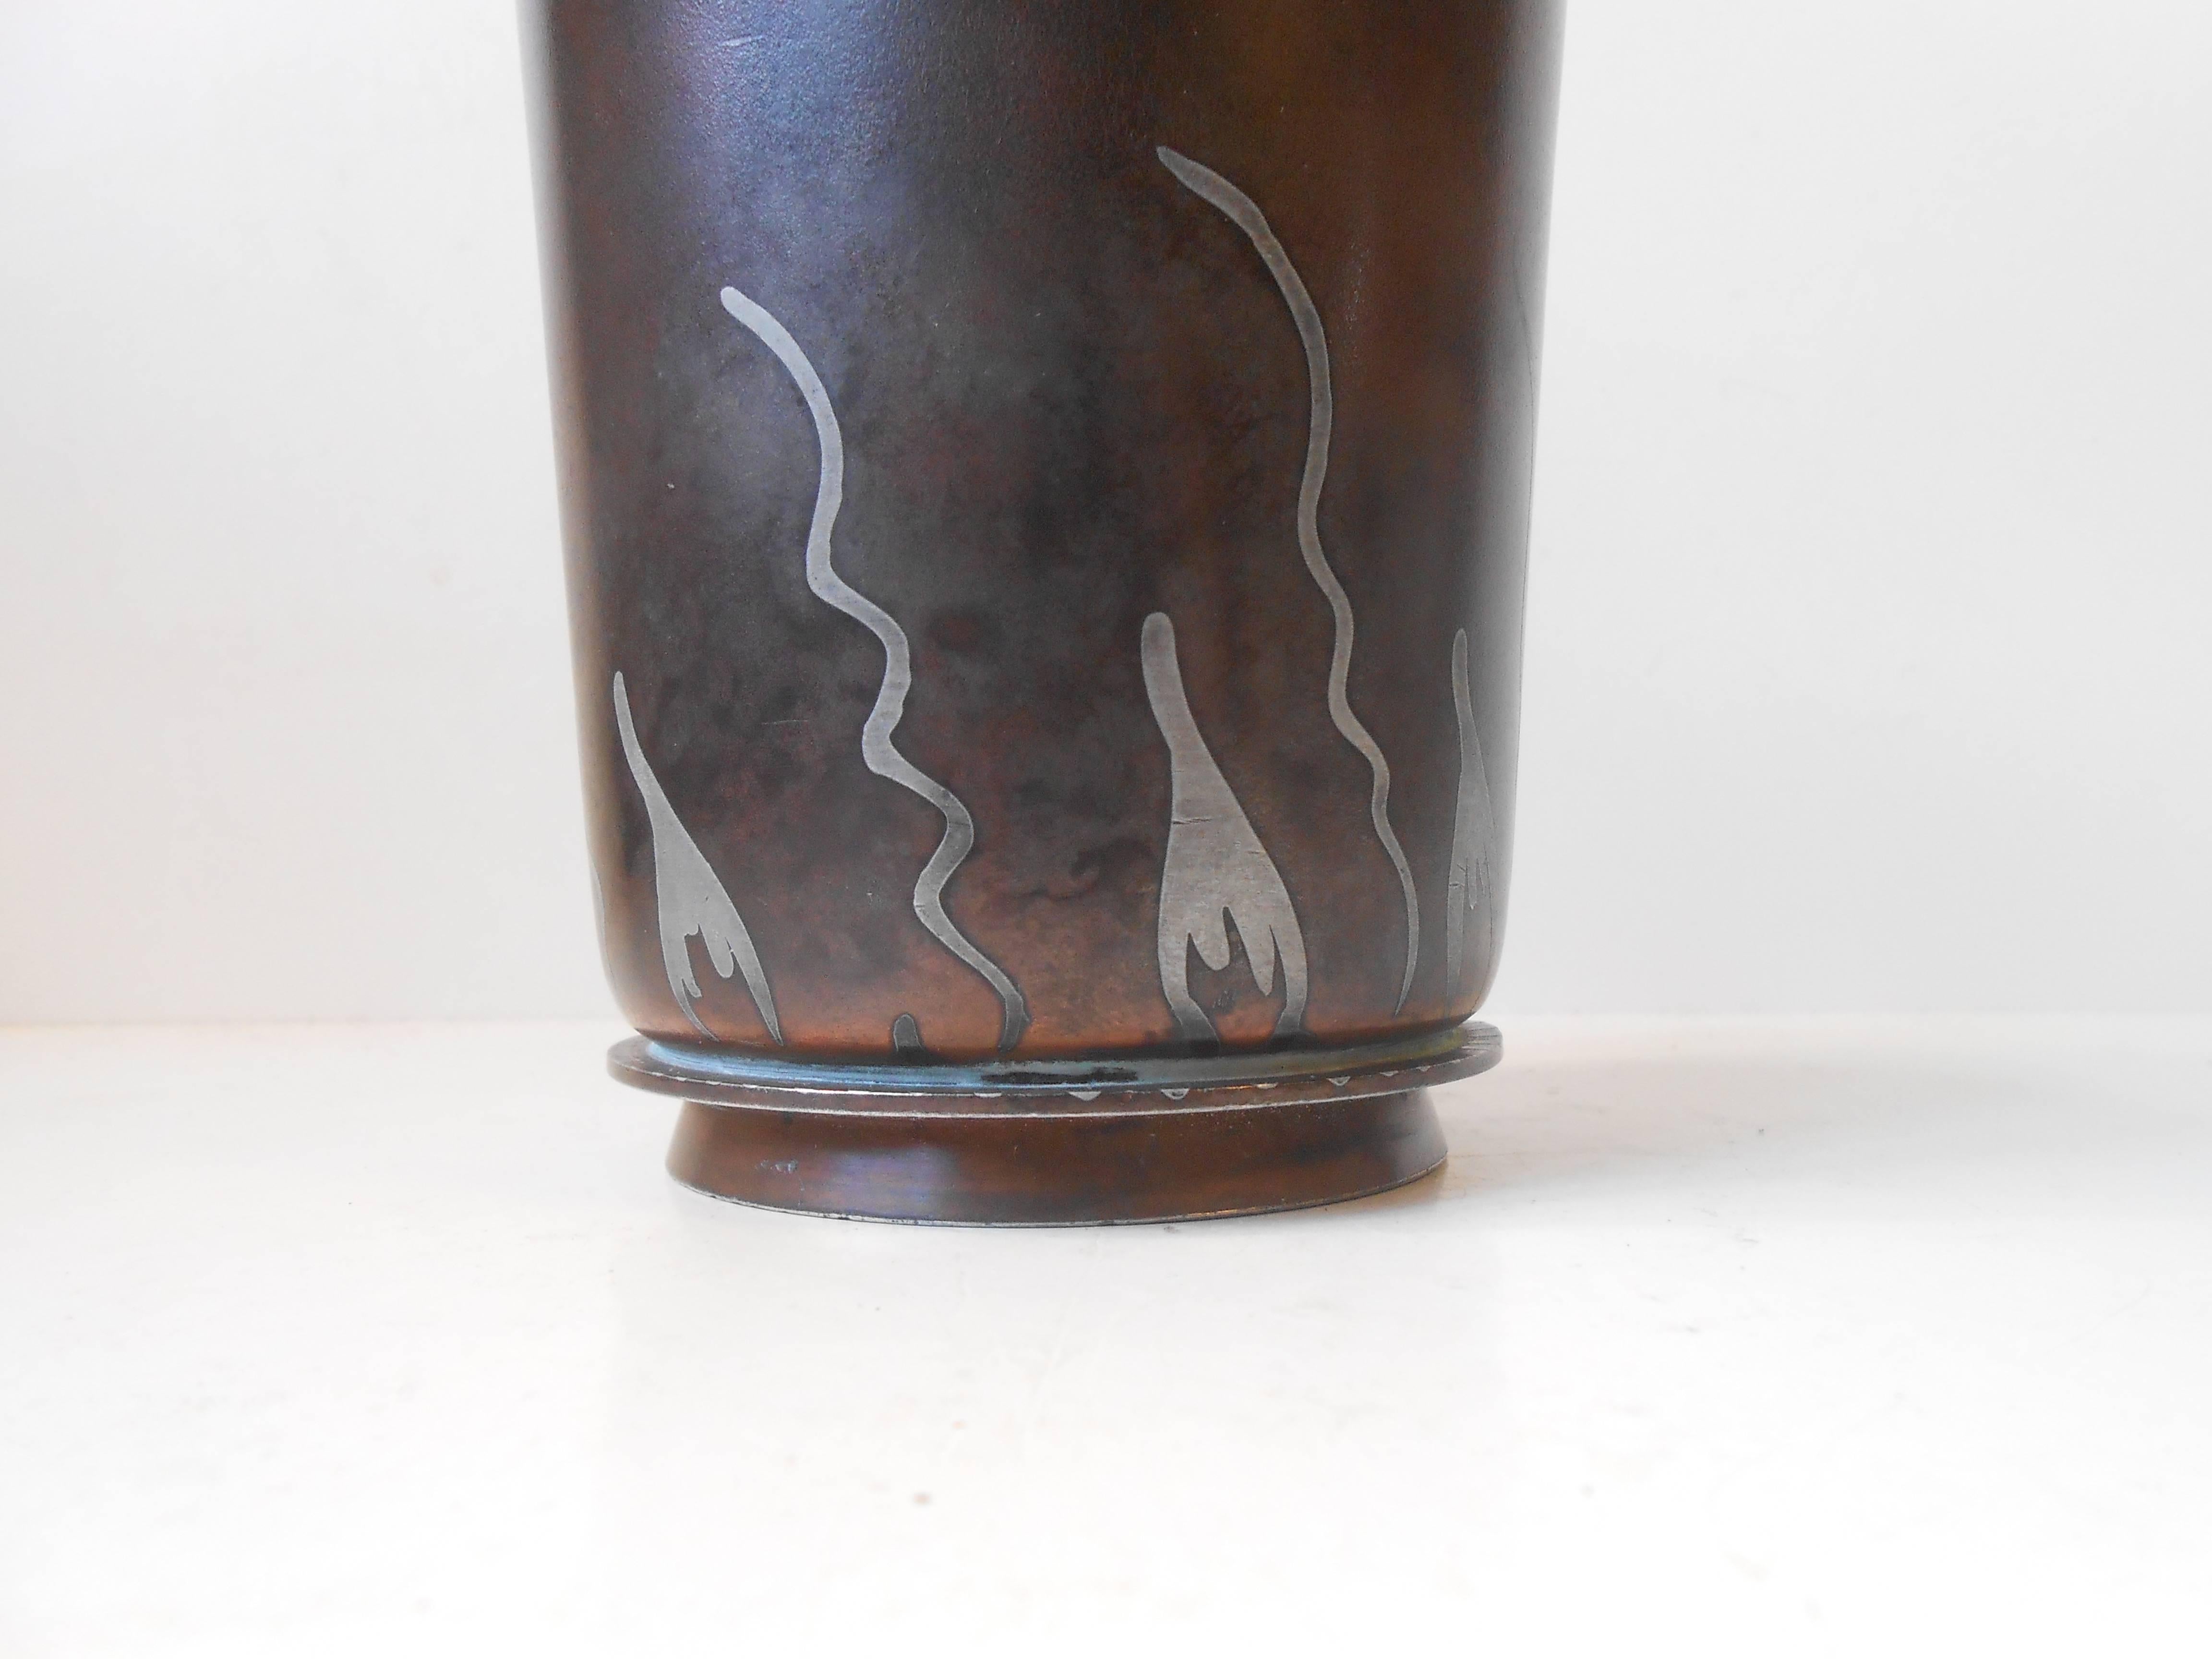 Metallurgy is the scientific experimentation of recovery, refining properties and uses of metals and formulation of metal alloys. Bronze, copper, tin, brass and silver are the most common ingredients. This vase made by Groos and Christensen in 1921